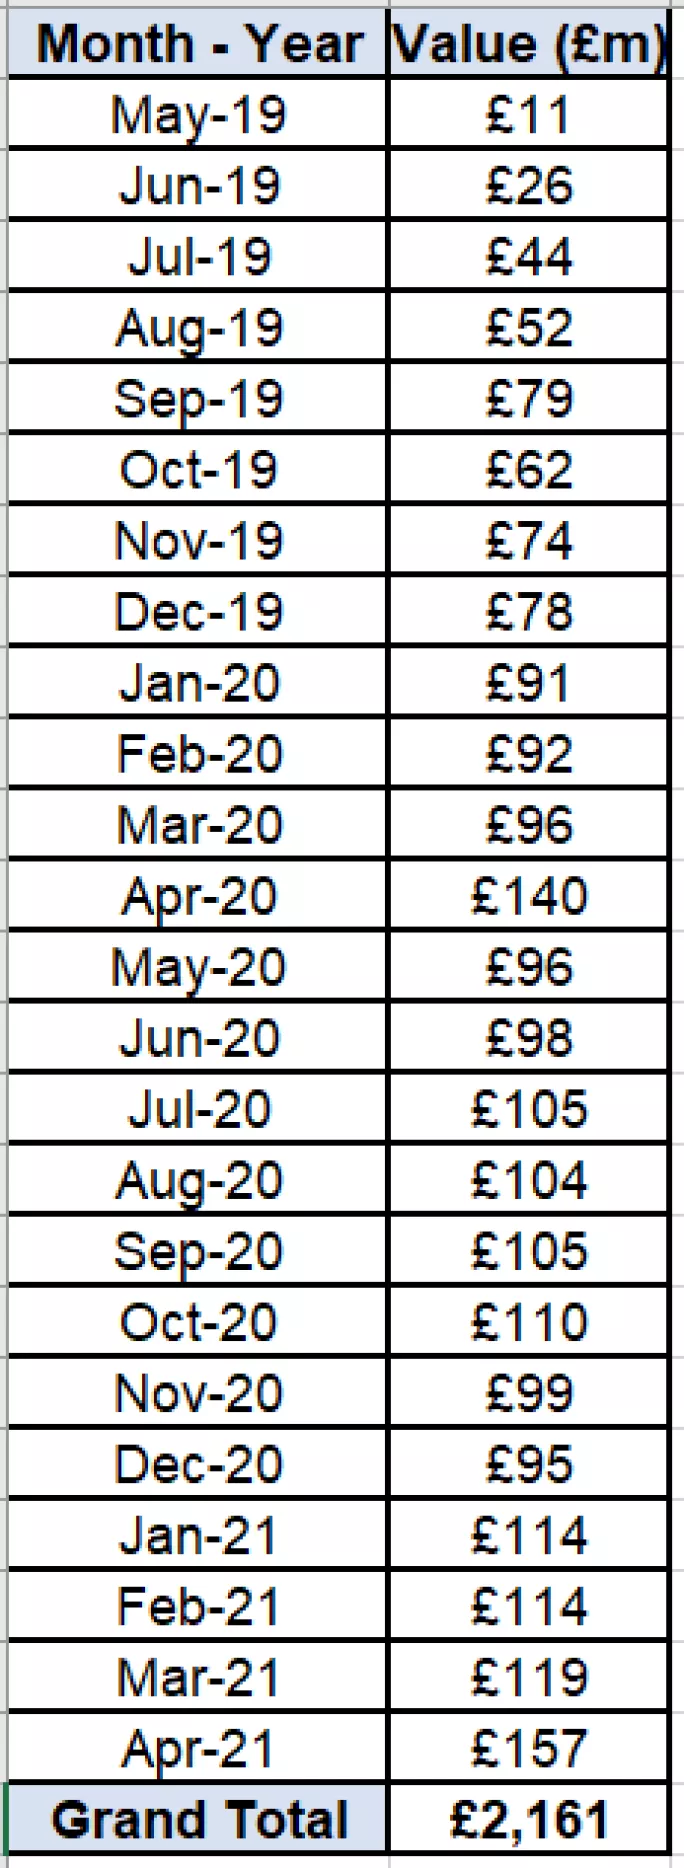 Expired apprenticeship levy funding by month